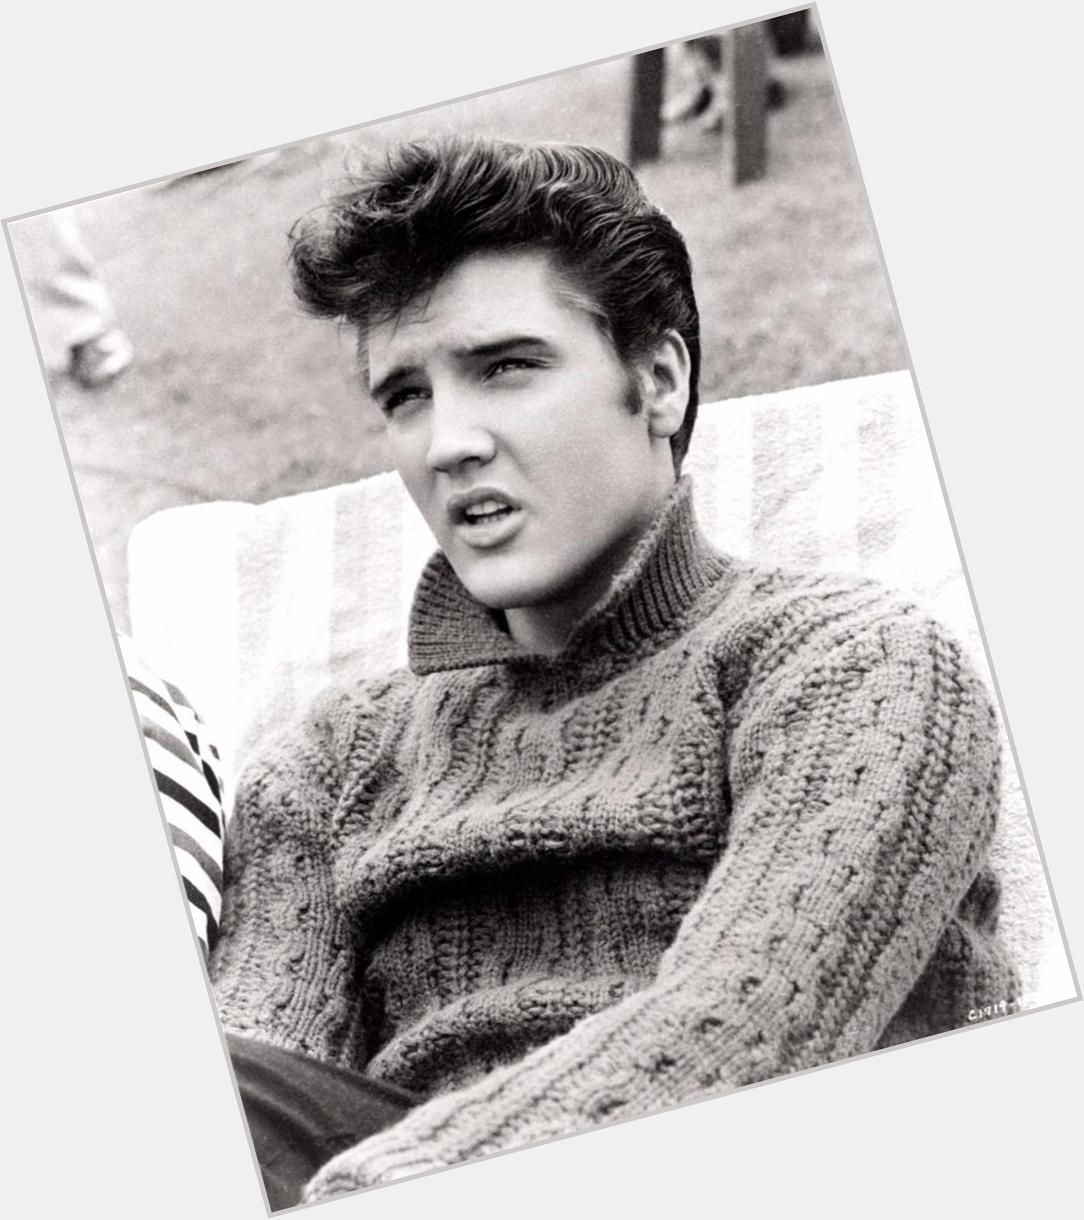 Happy 80th birthday to someone I consider a star and one of the closest people to perfection. Elvis Presley, . 